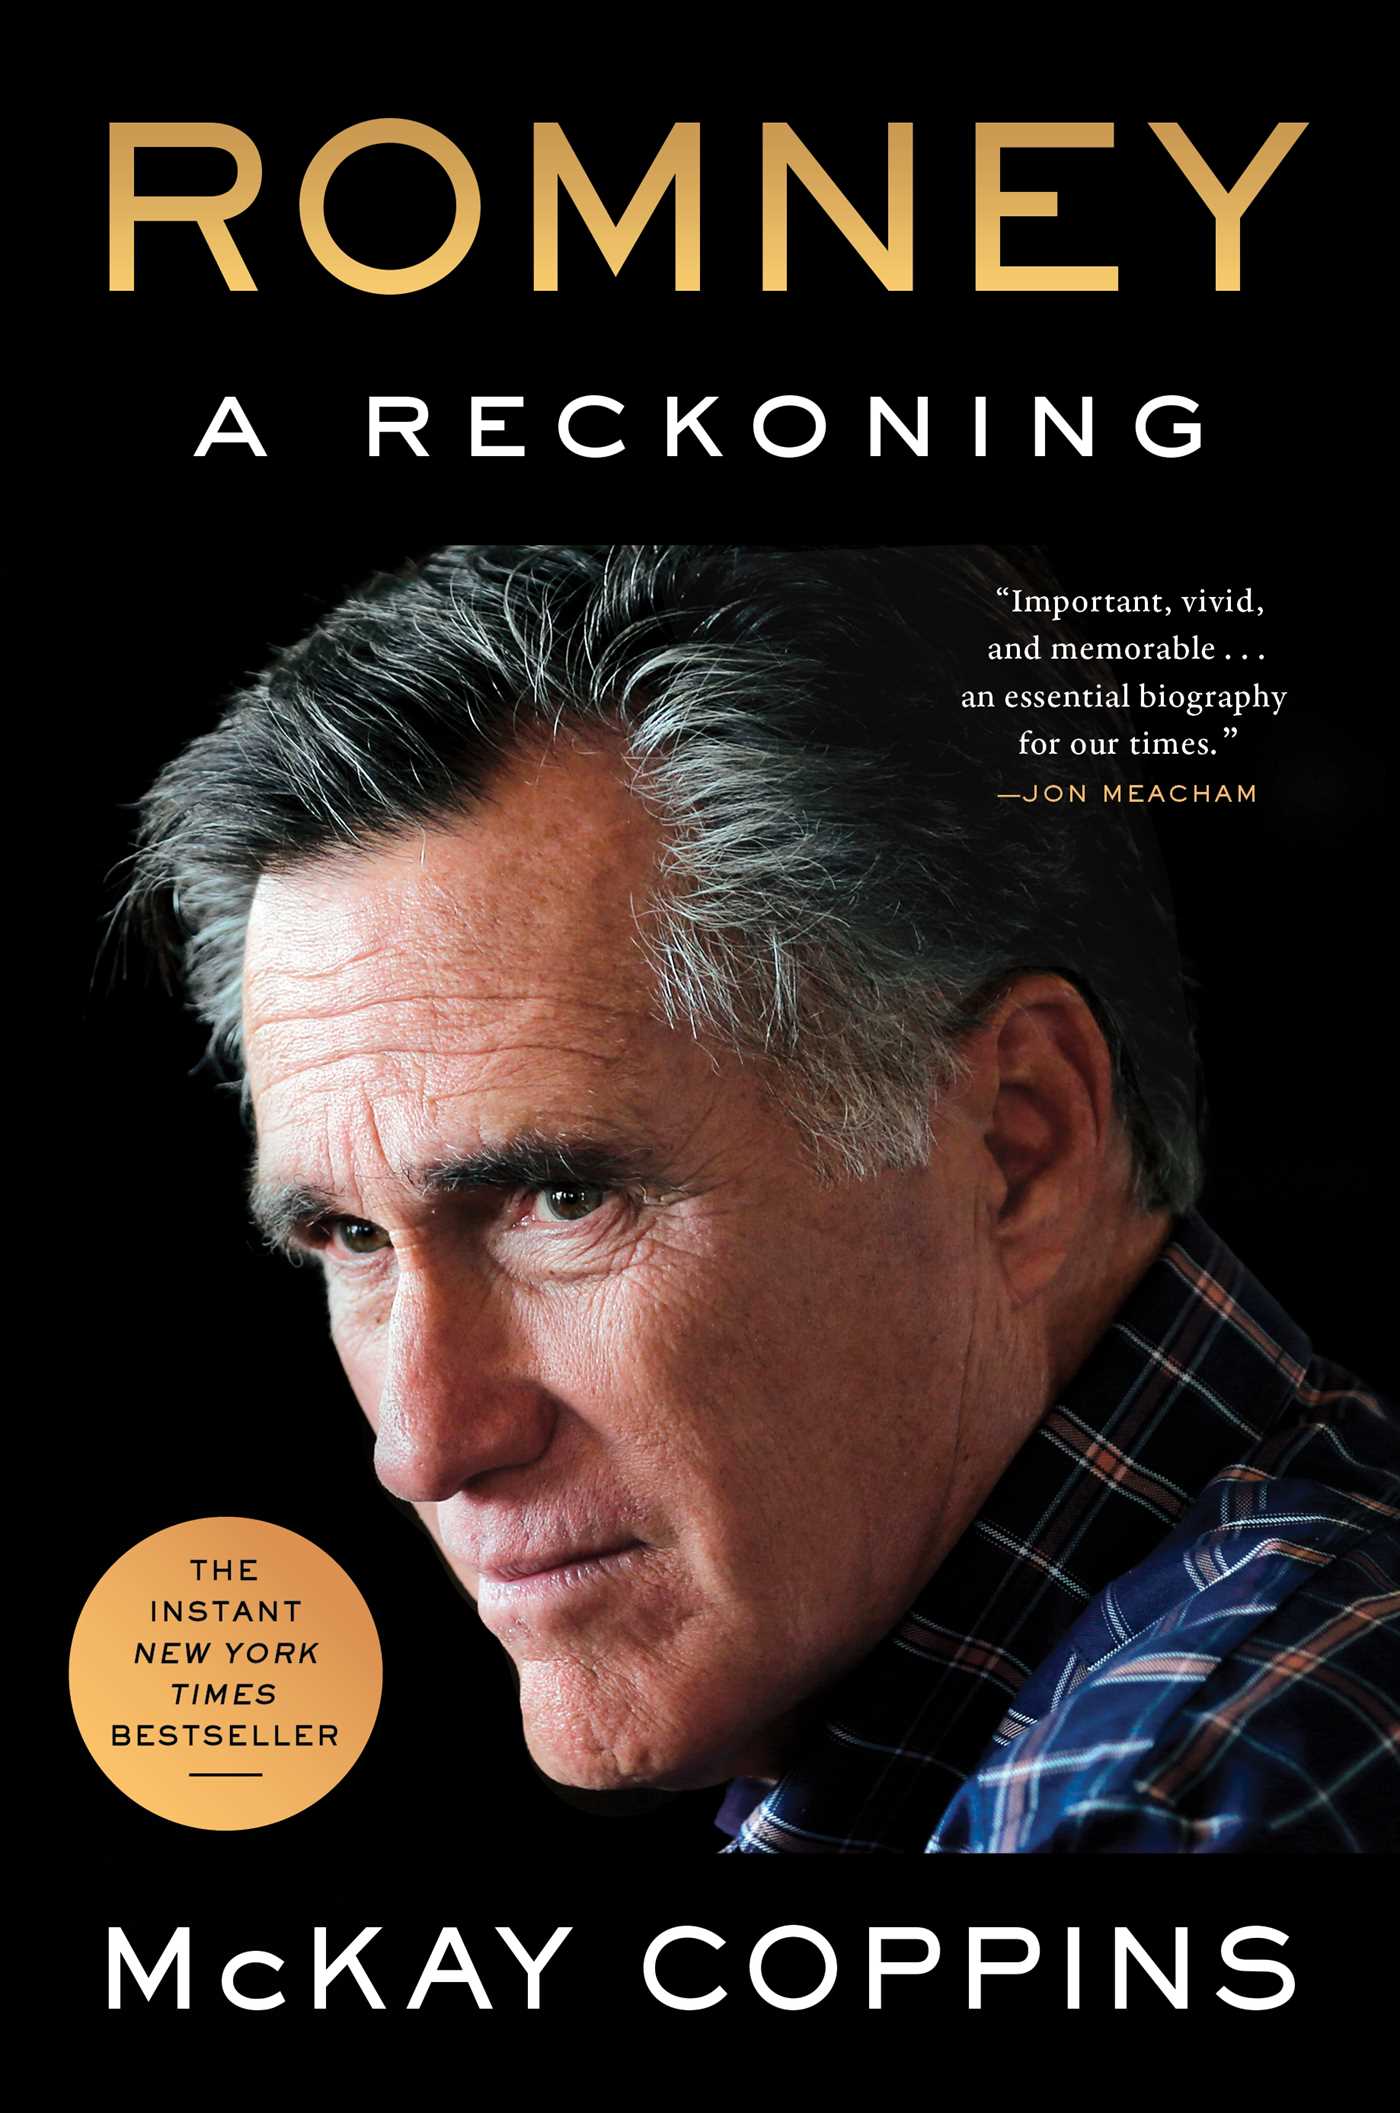 Romney A Reckoning cover image